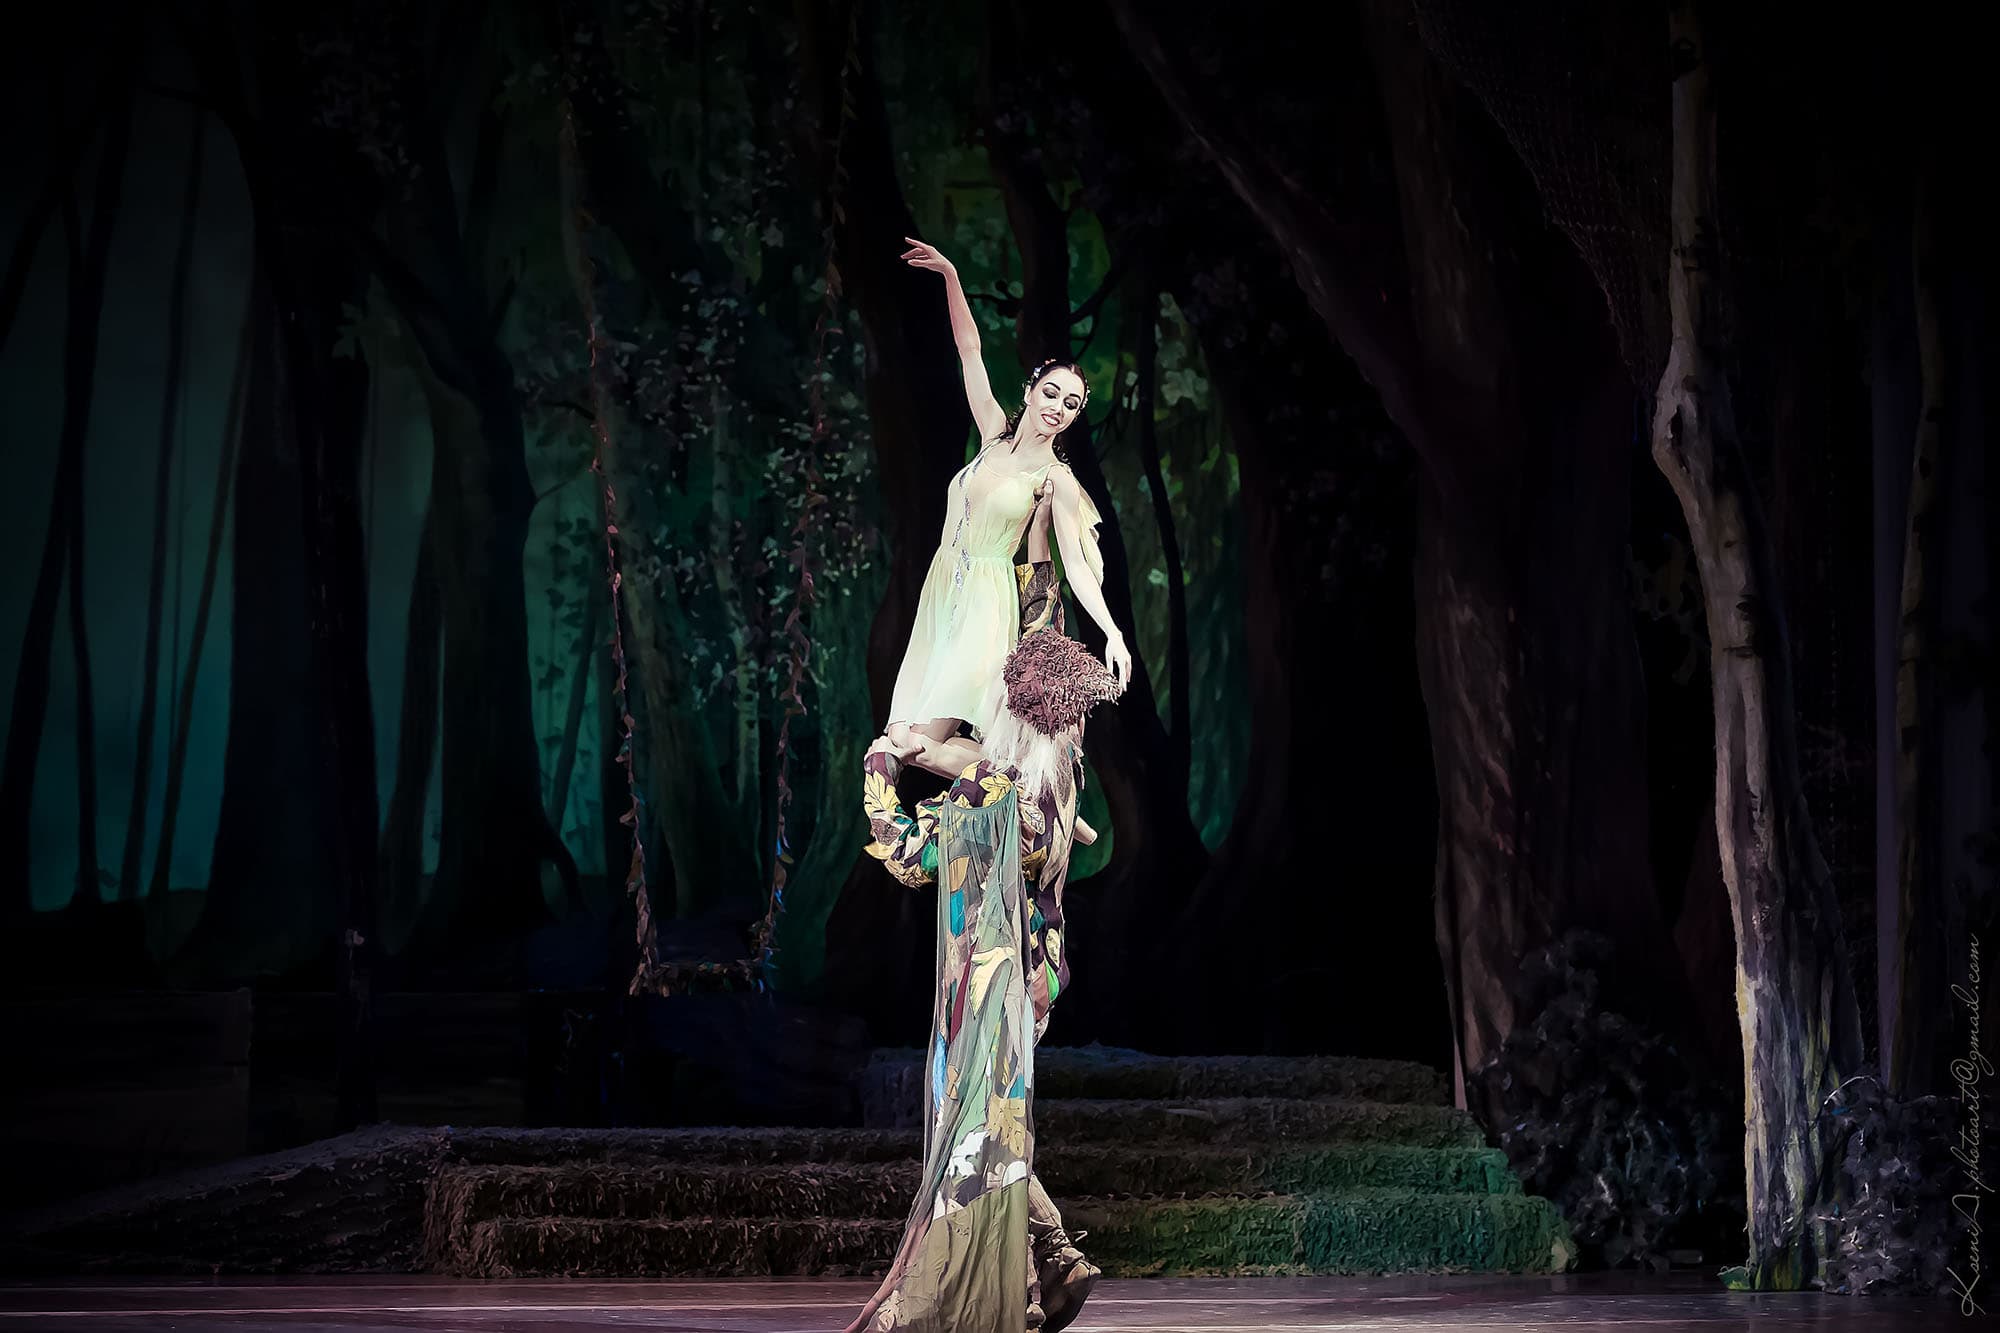 The Forest Song A fragment from a ballet. Mavka - Kateryna Kukhar and Forester - Maxim Bernadskyi.